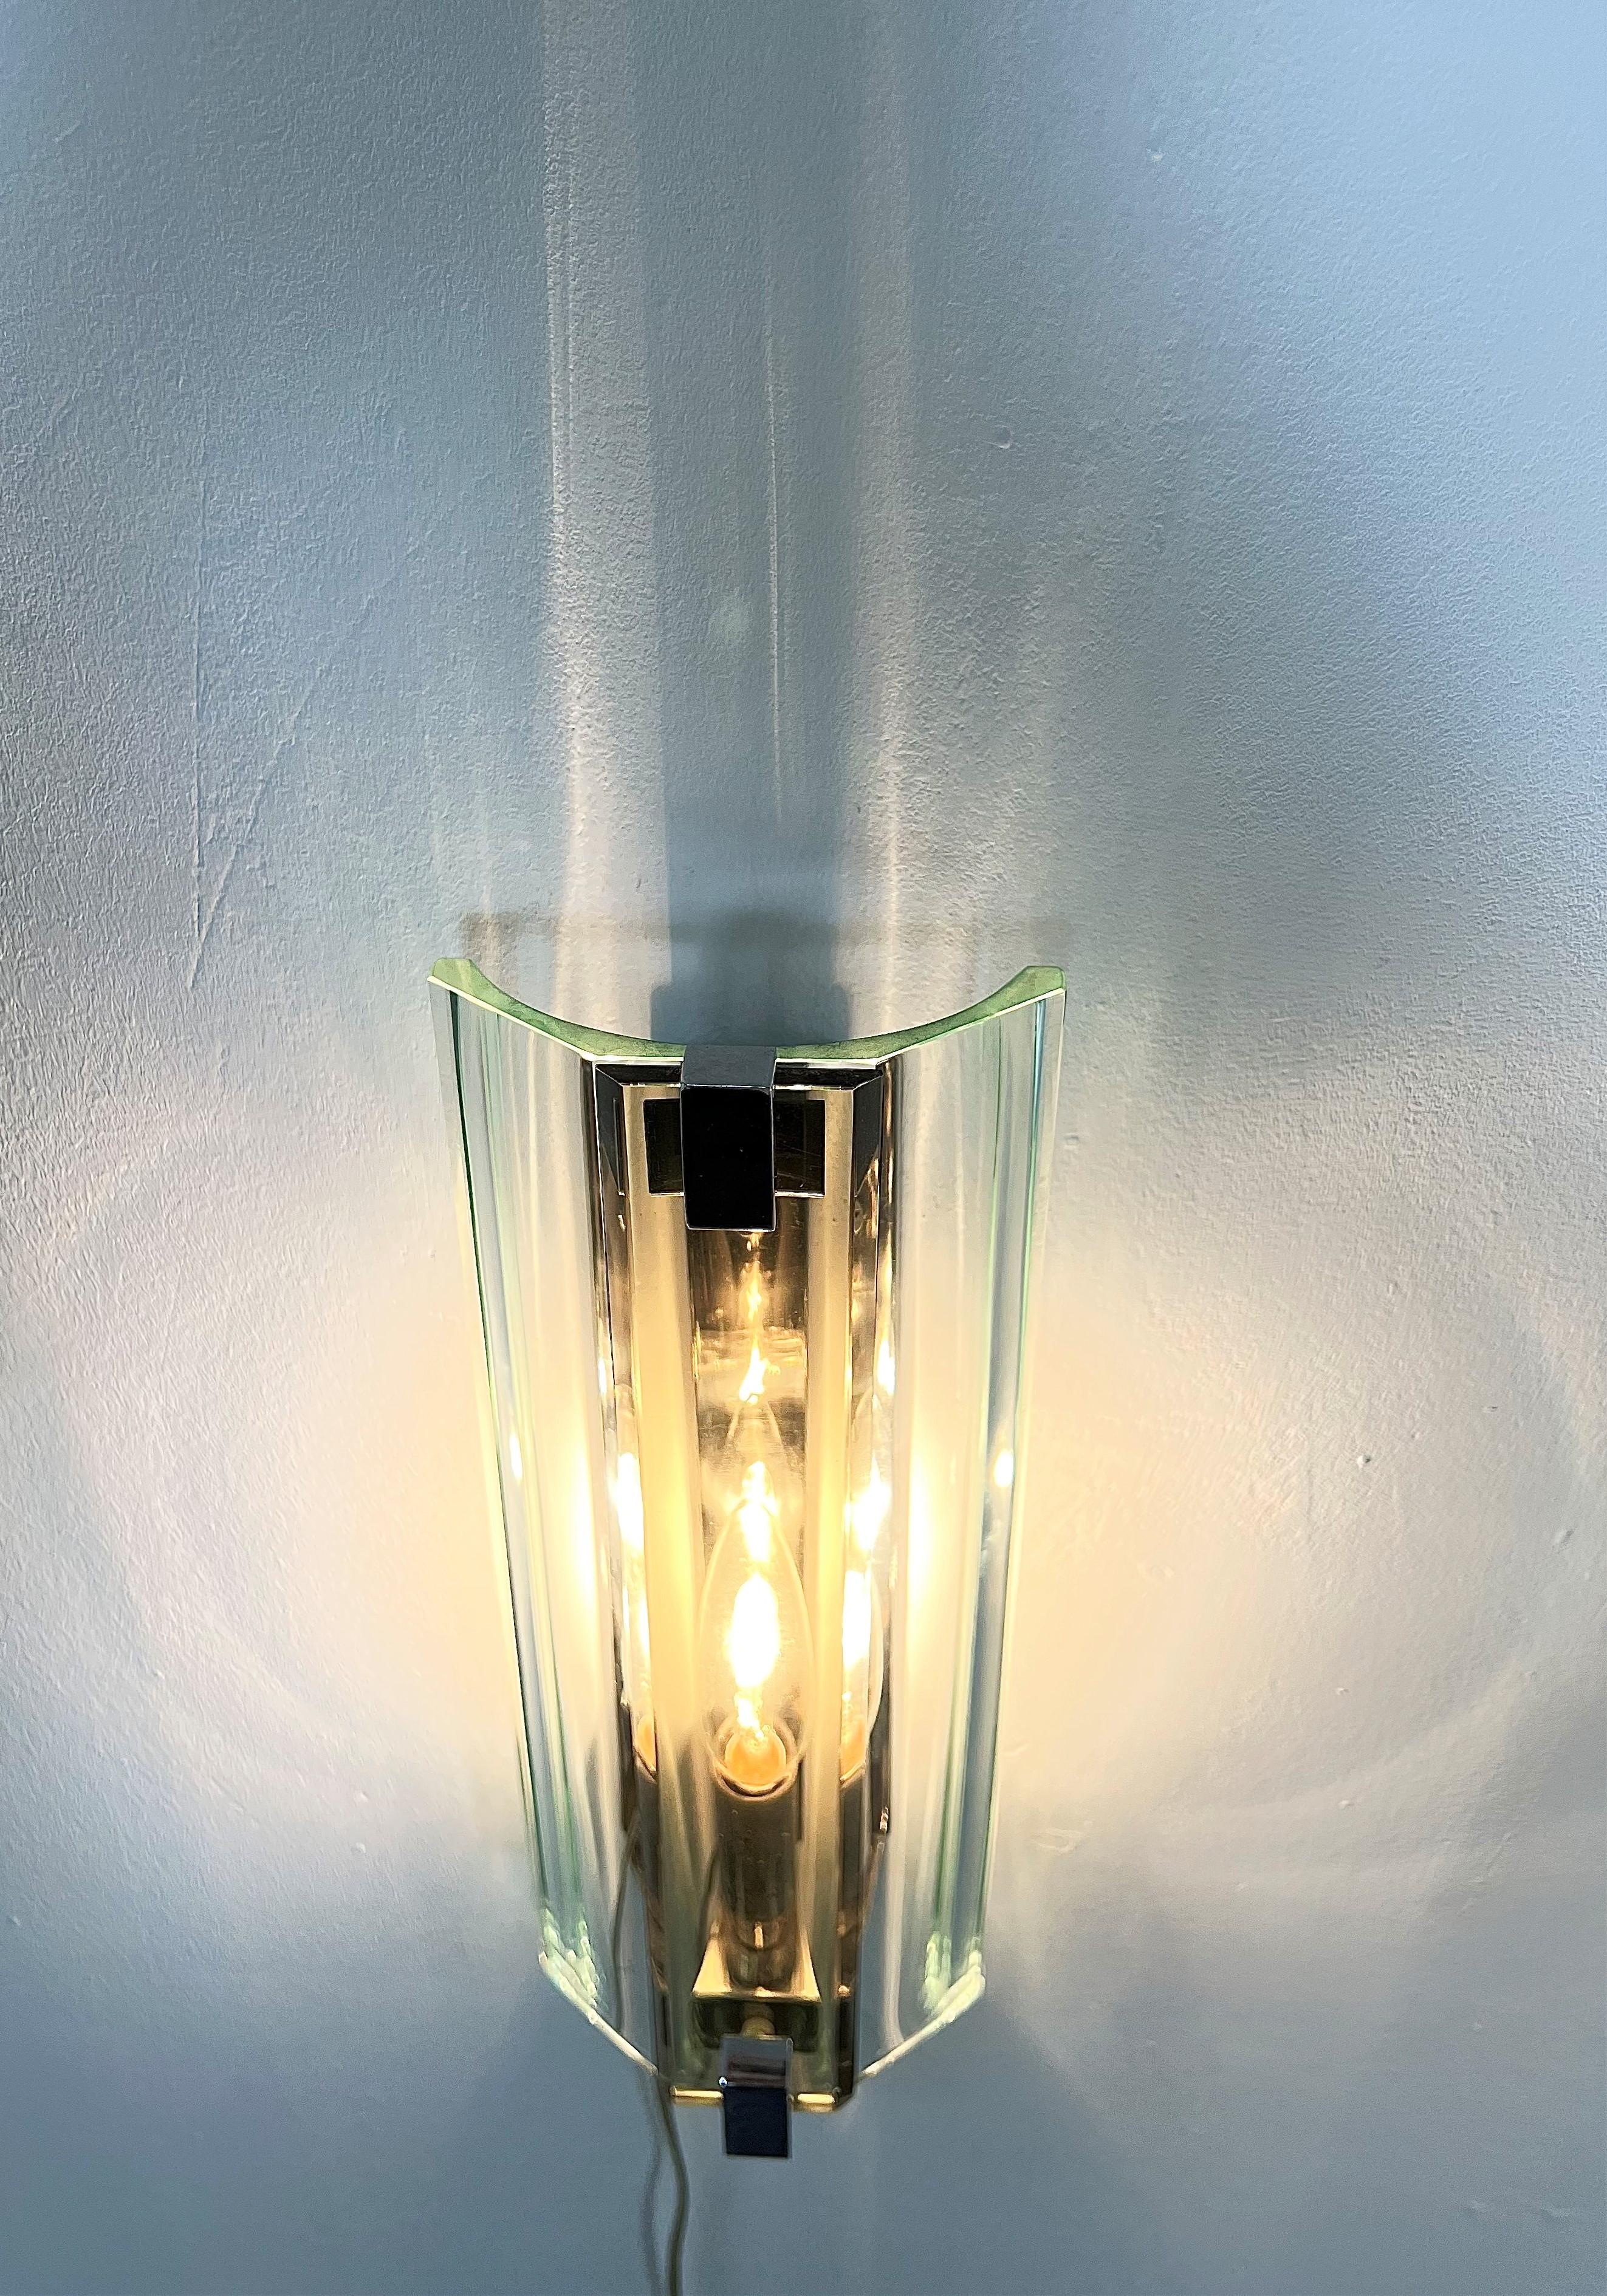 Midcentury Wall Lights Sconces Glass Metal Aluminum Veca Italy 1970s Set of 2 For Sale 1